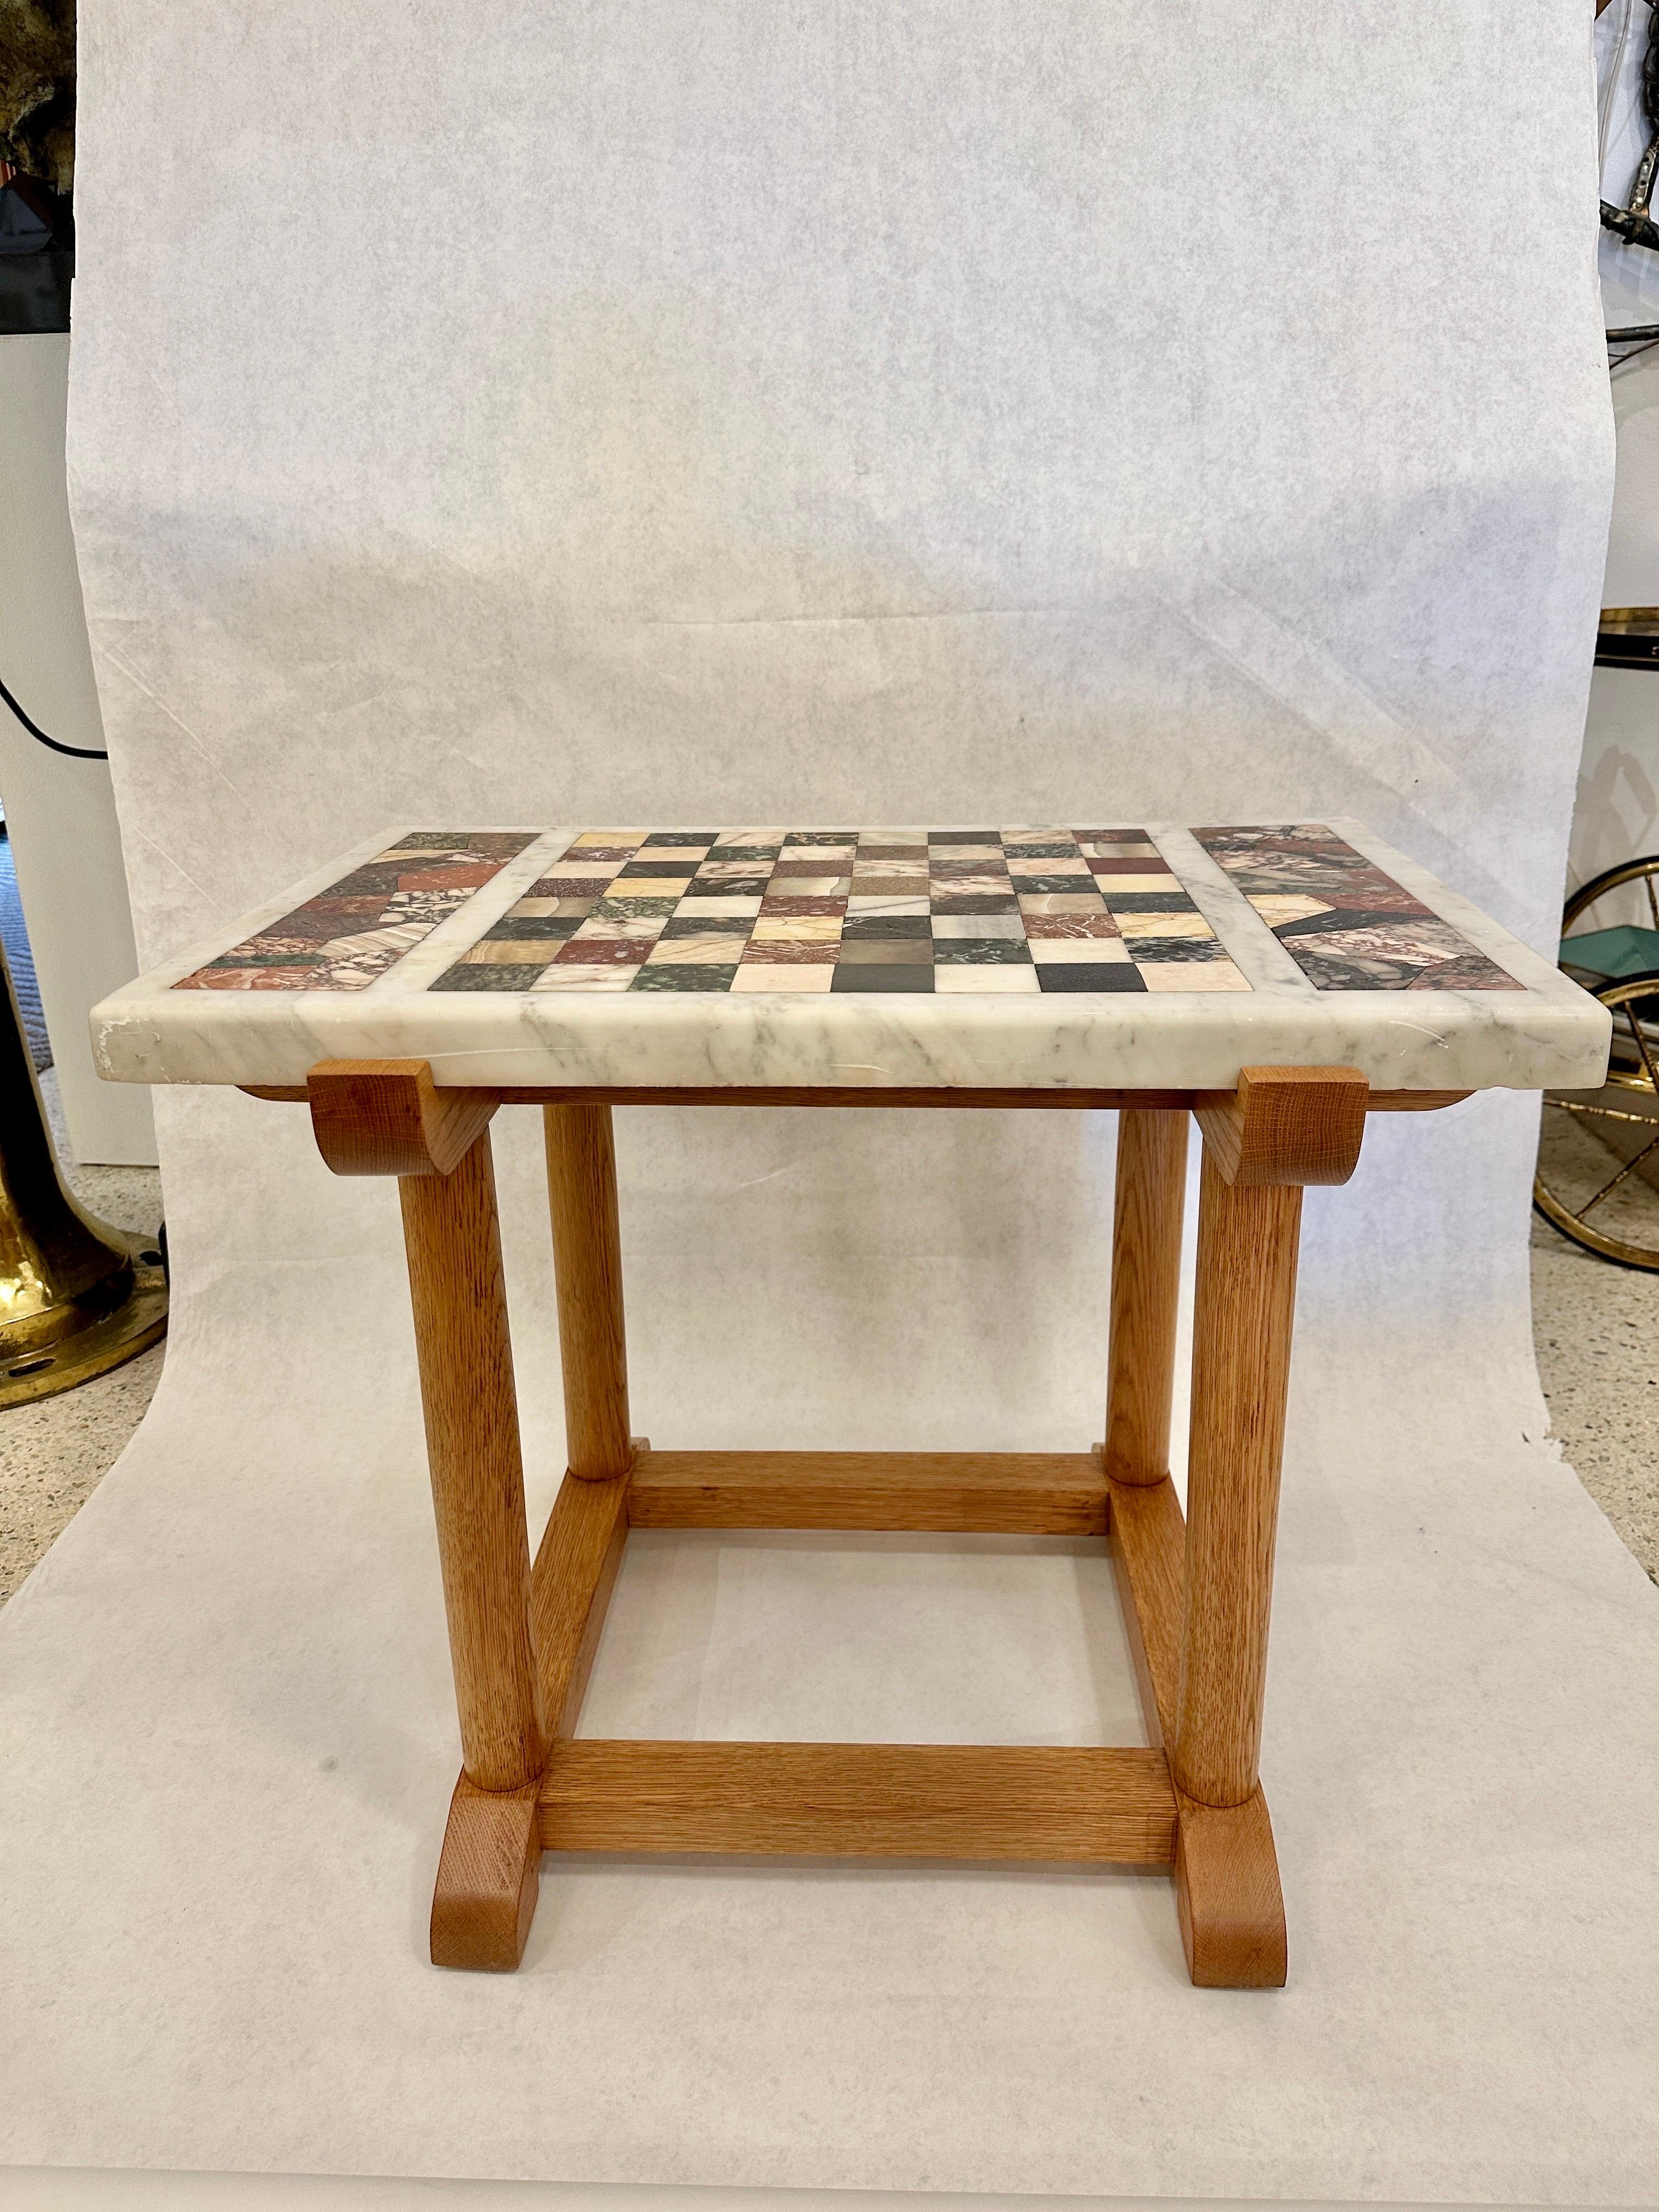 In the manner of Swedish furniture designer, Axel Einar Hjorth, this beautiful oak base side table with an antique marble chess top, features many rare stones including porphyry marble. Details abound on this wonderfully unique side table. SEE ALL